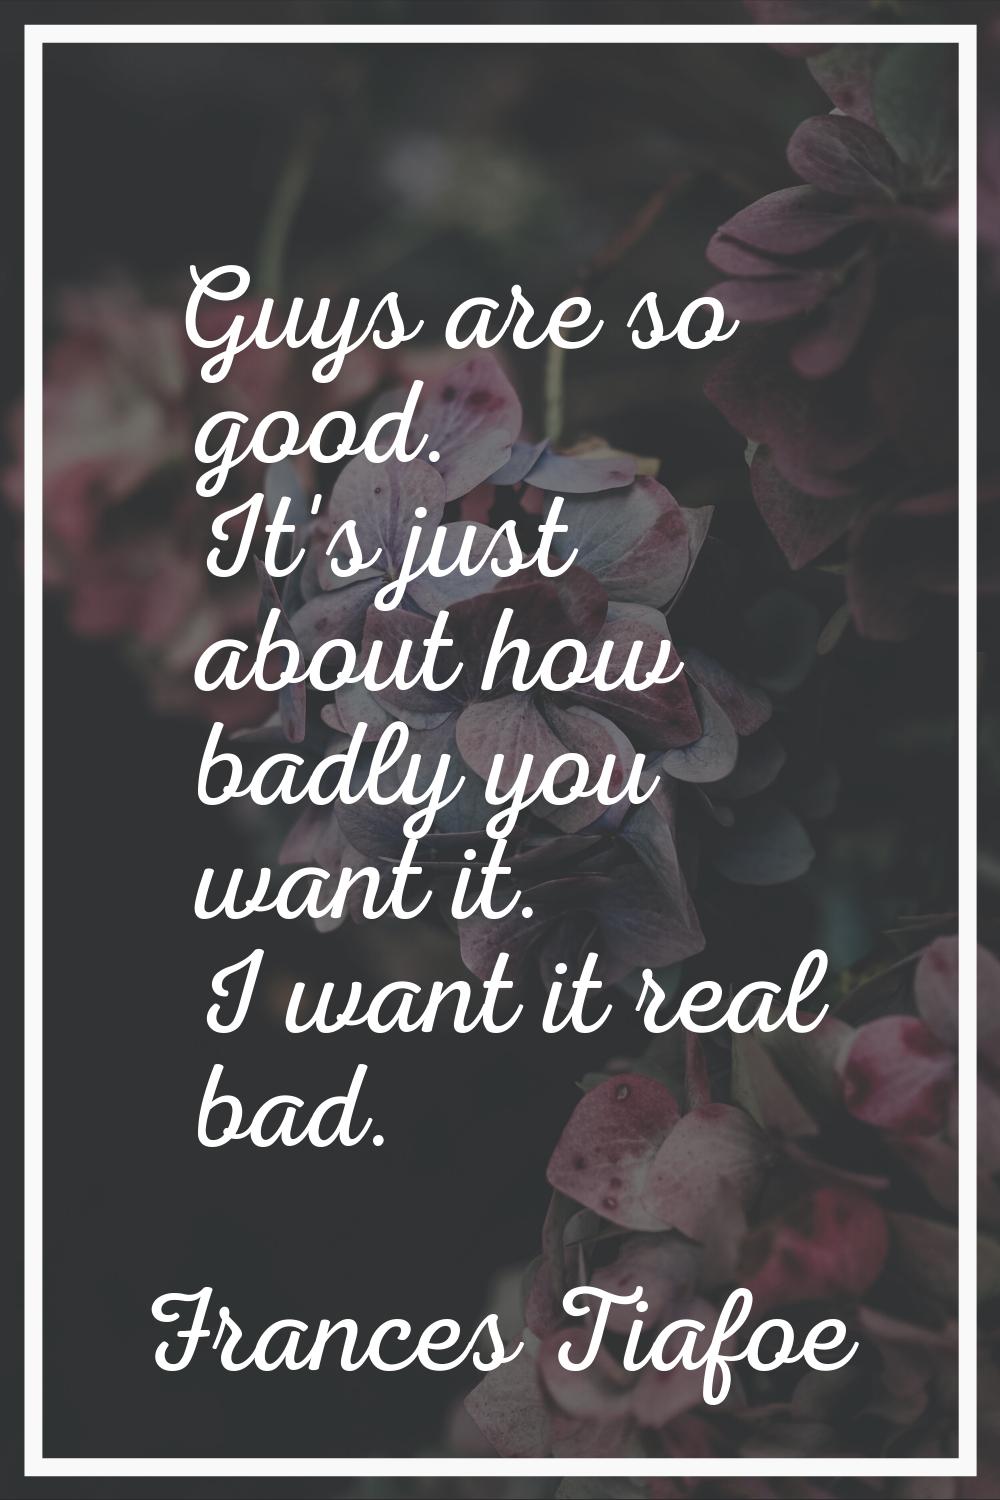 Guys are so good. It's just about how badly you want it. I want it real bad.